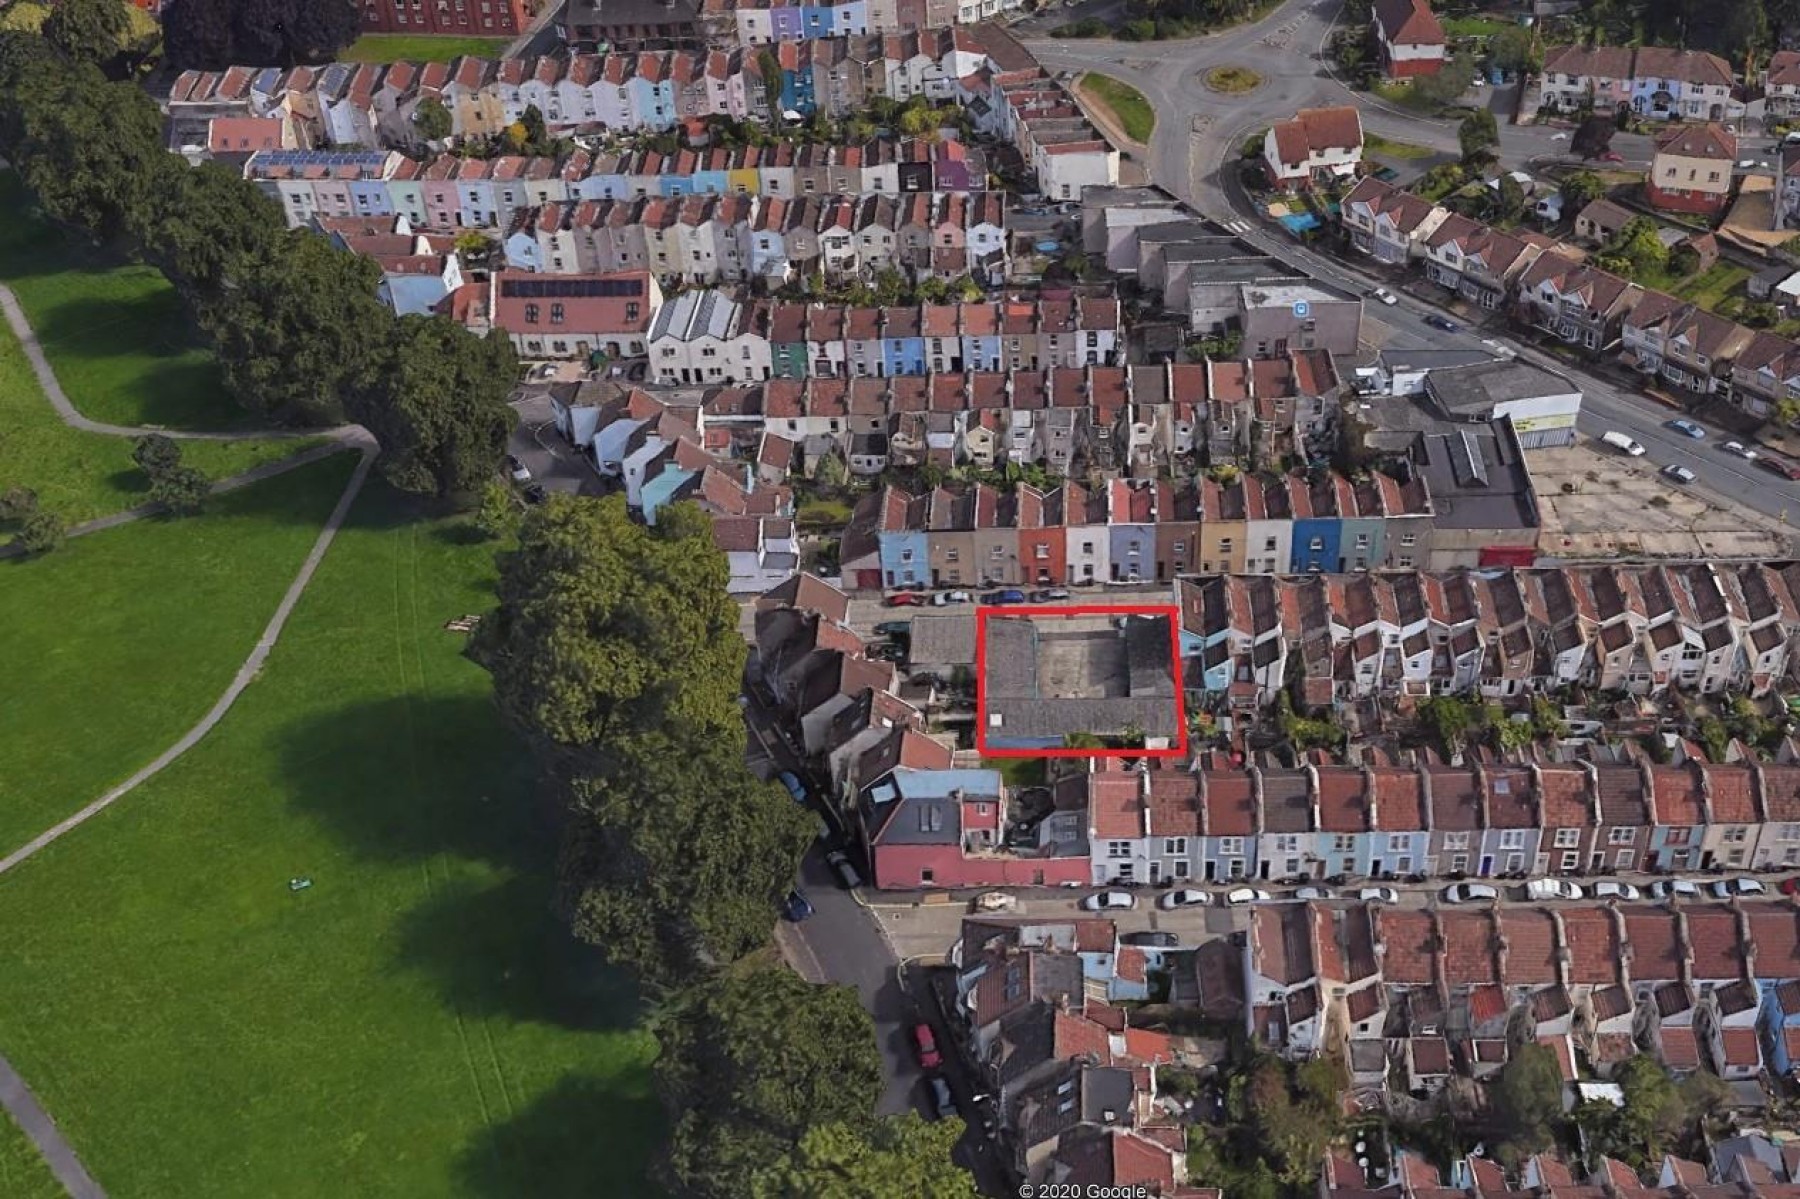 Images for PLANNING GRANTED - 3 X HOUSES ( GDV £975k )